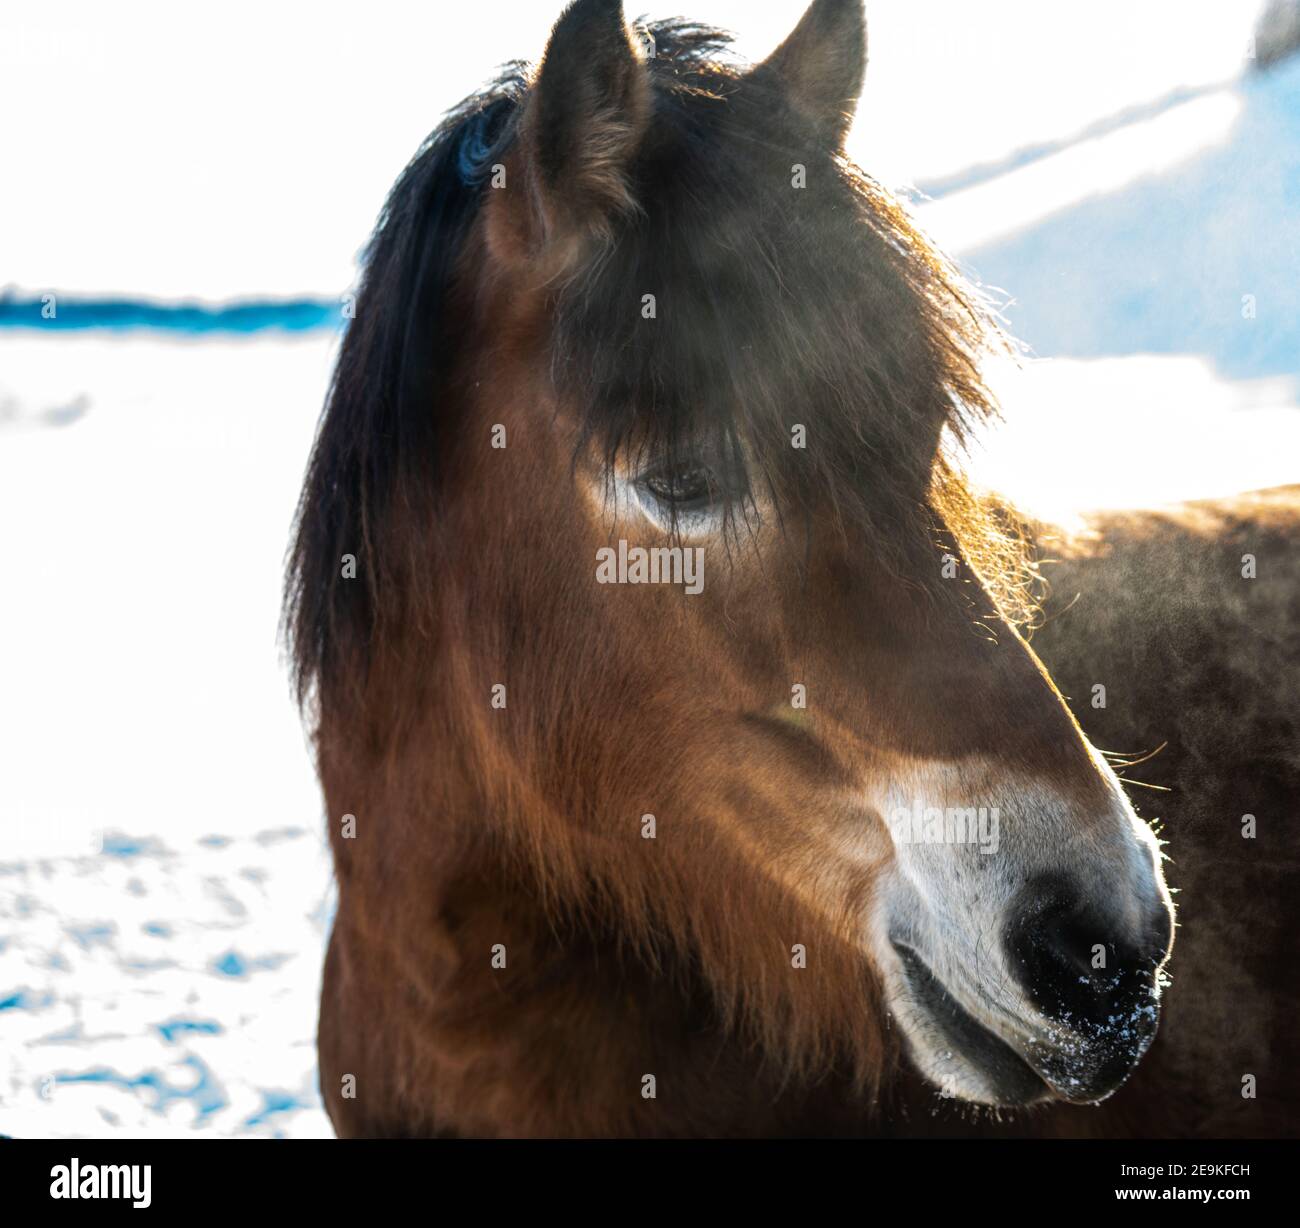 Portrait of a horse with close up of the head on a snowy winter background. Stock Photo